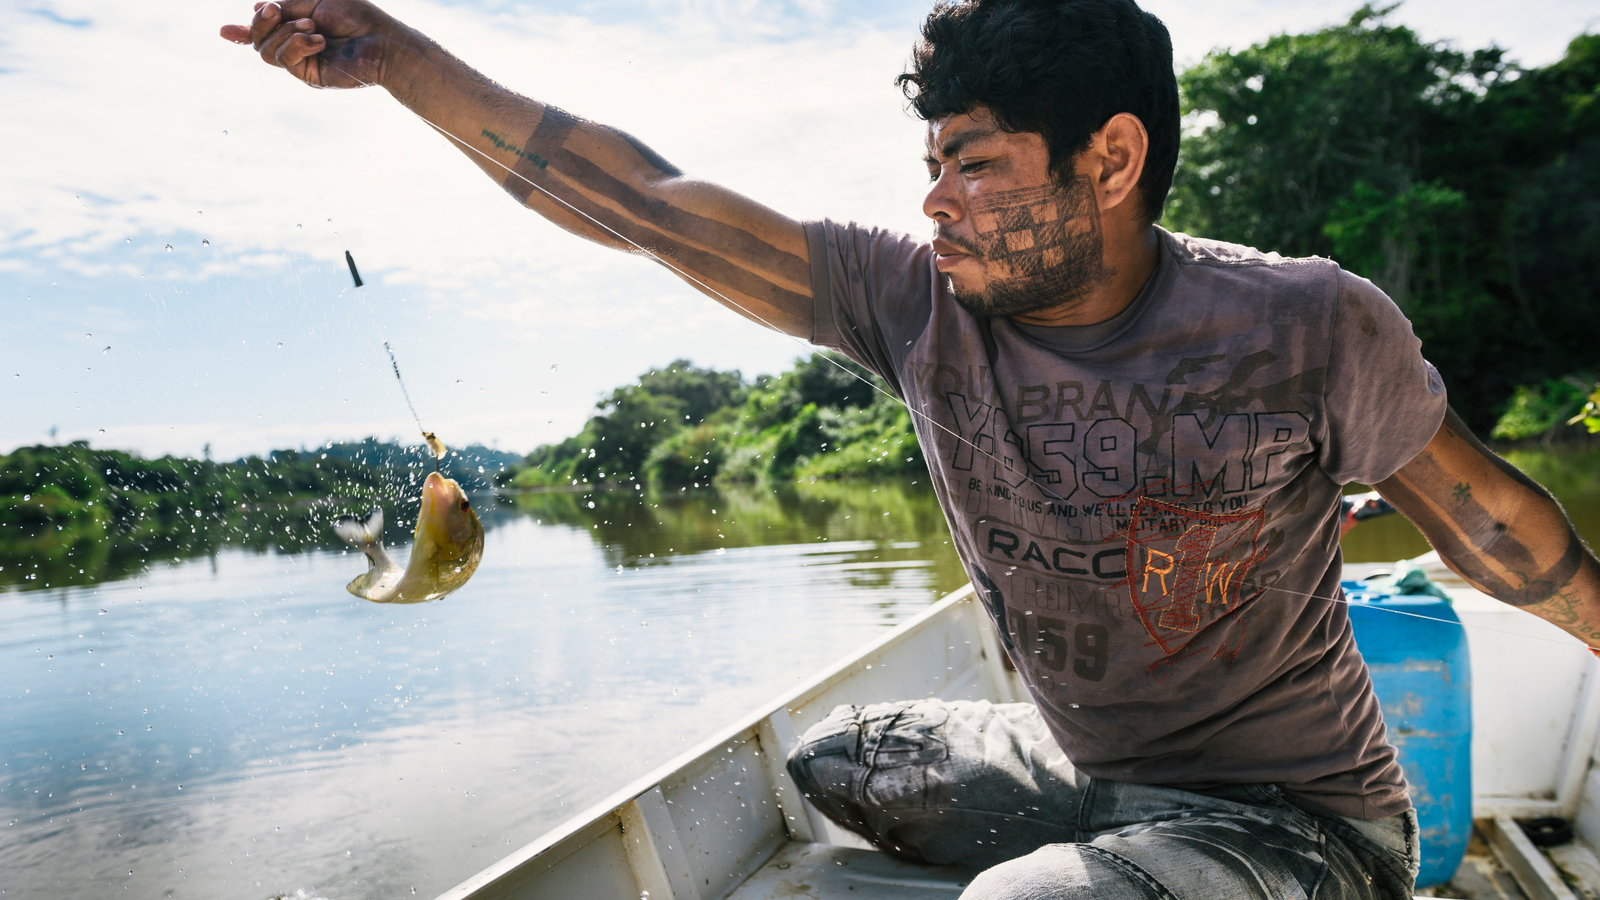 Tekakro Xikrin fishing on Rio Bacaja near Pot-Kro Village. Tekakro uses many techinques such as coconut larve to catch minnows and then uses minnows to catch piranhas. Parts of the piranhas are used for bait to catch fish for food. Photo © Kevin Arnold